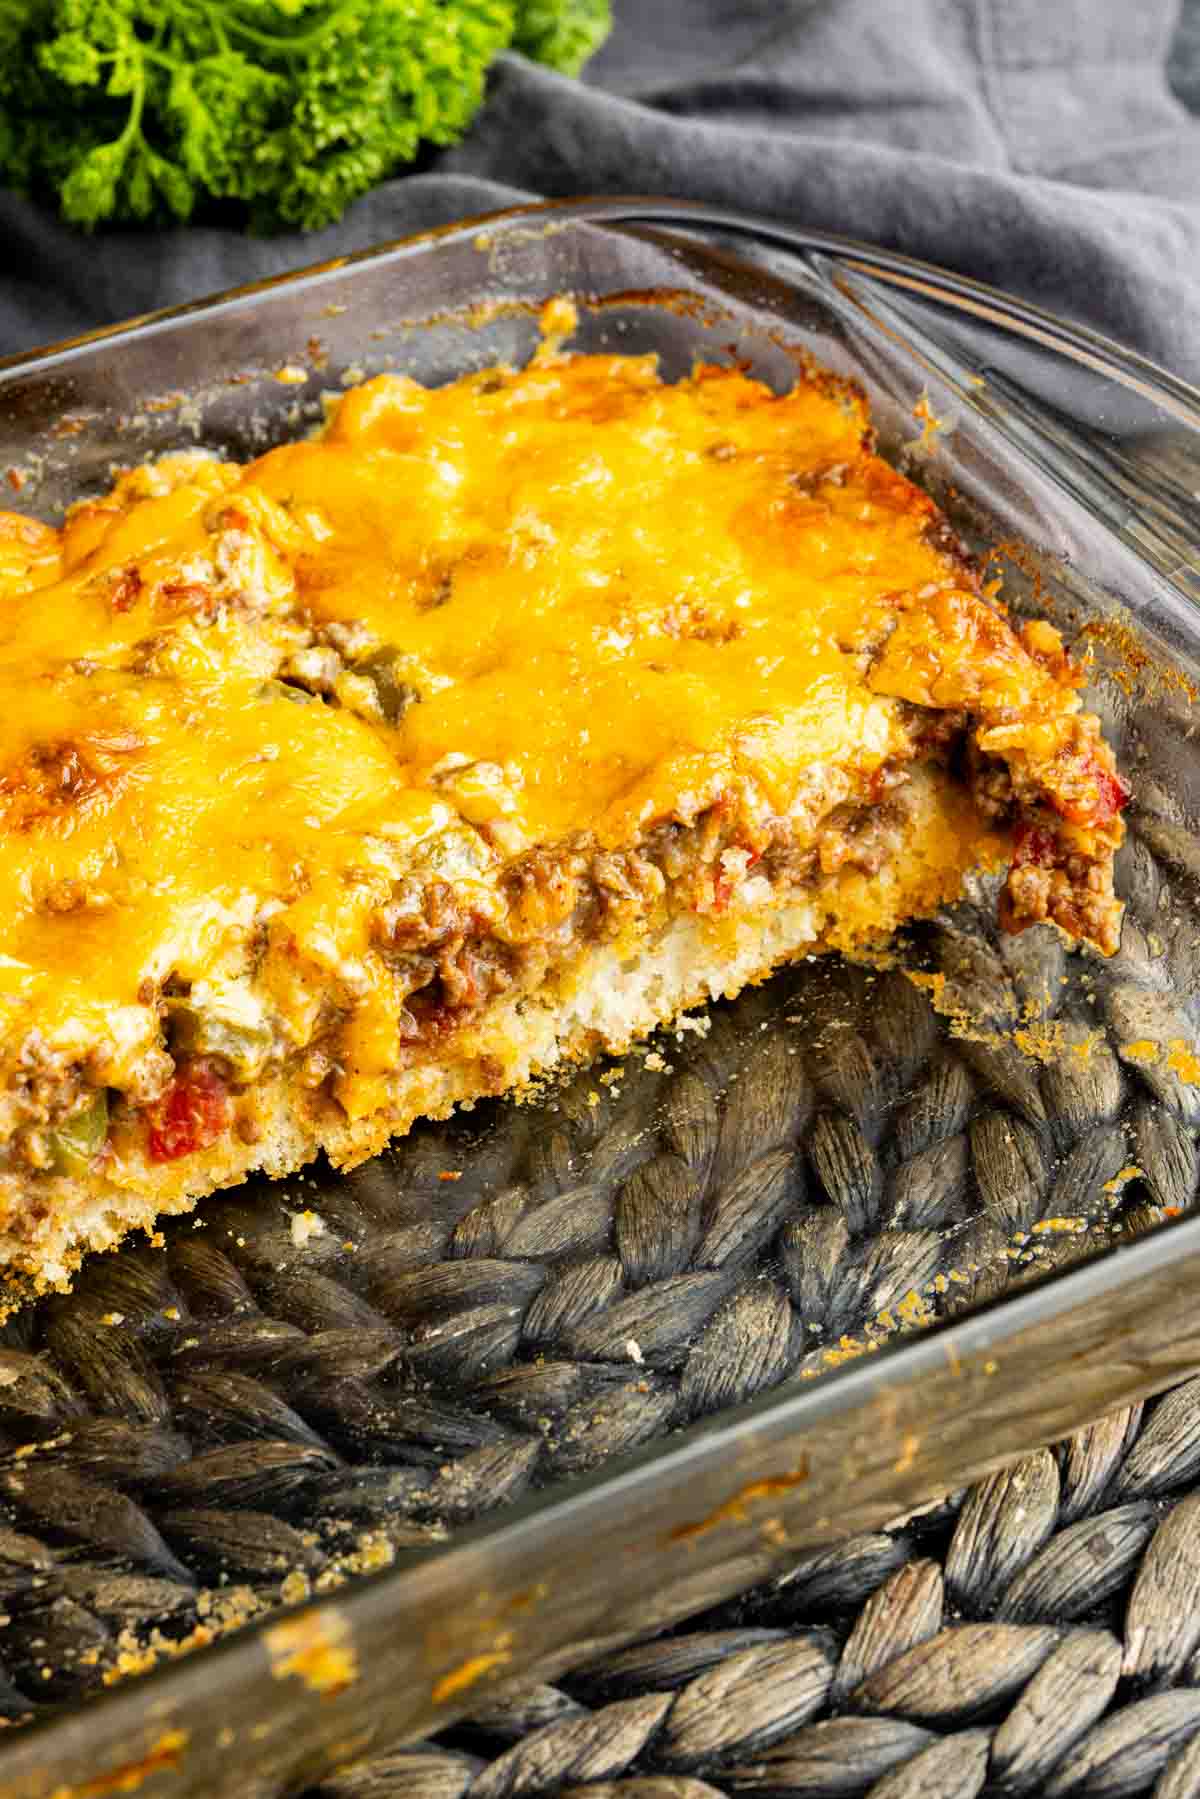 A John Wayne Casserole dish filled with meat and cheese.